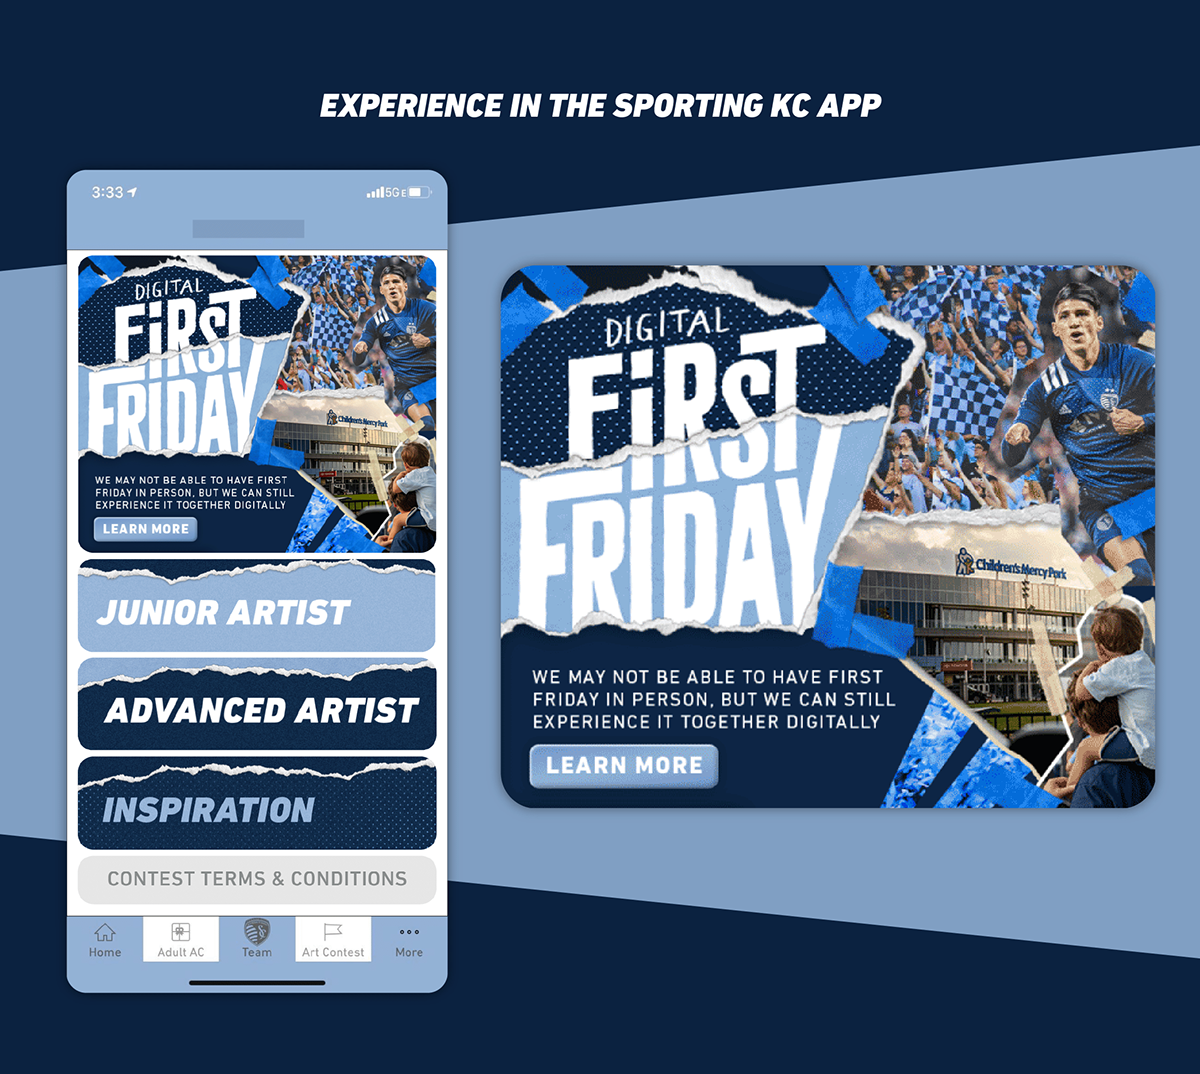 app collage contest digital Event first friday kansas city Social Distancing Event Sporting KC